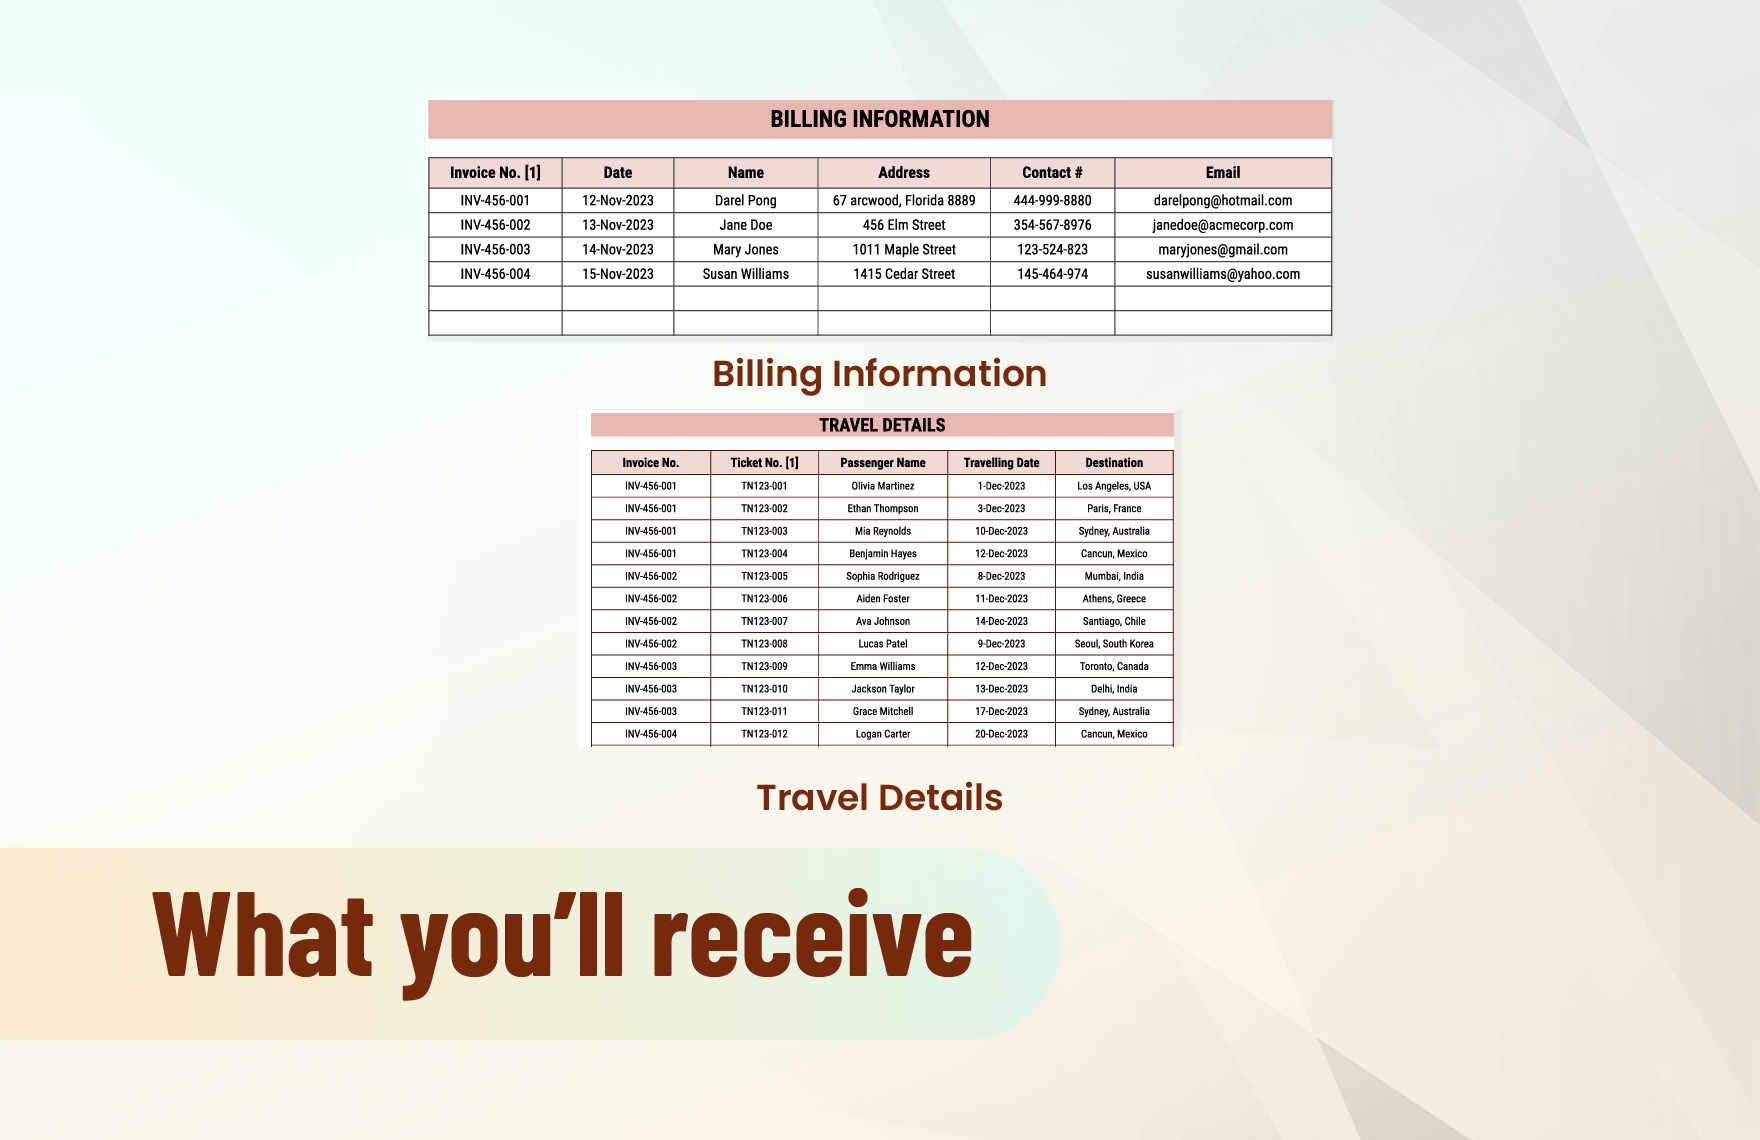 Business Travel Invoice Template